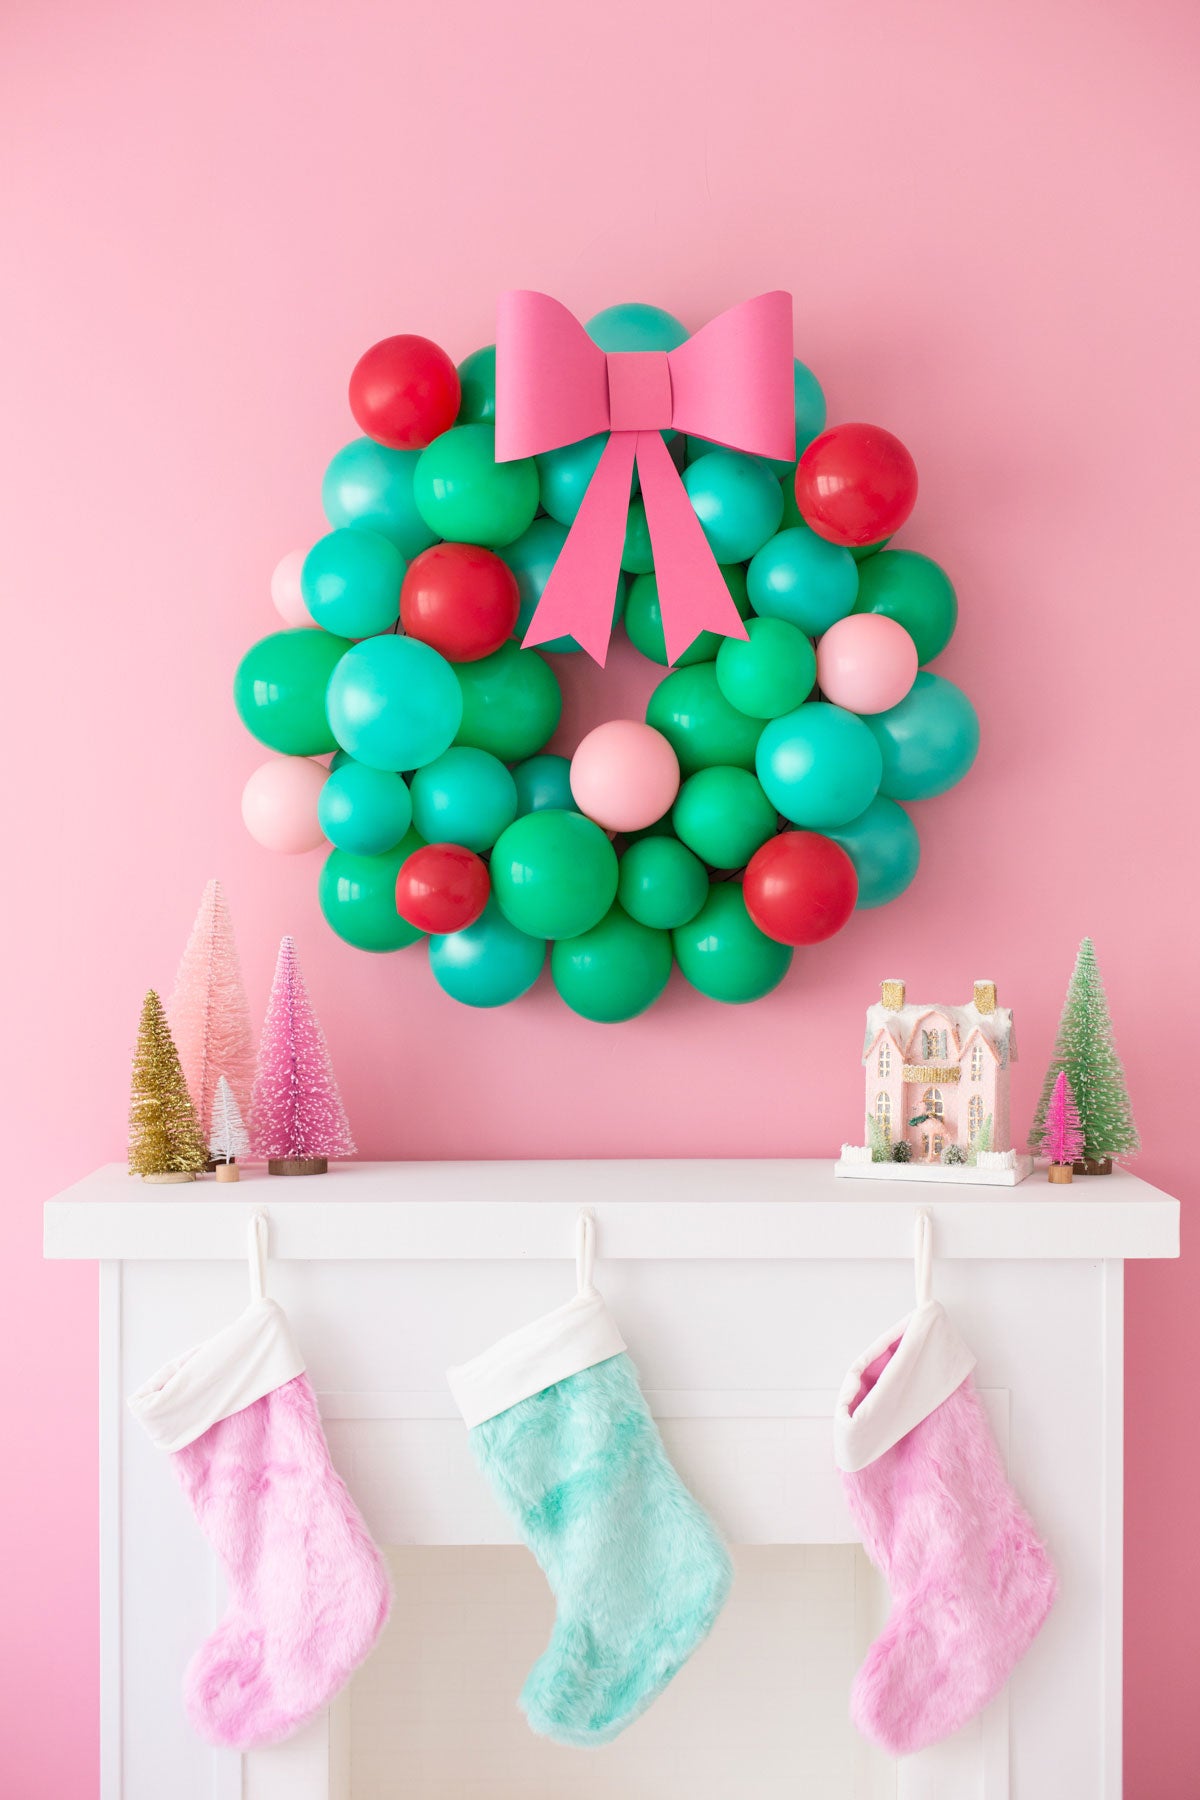 DIY Balloon Wreath for Holiday Party - Pretty Collected